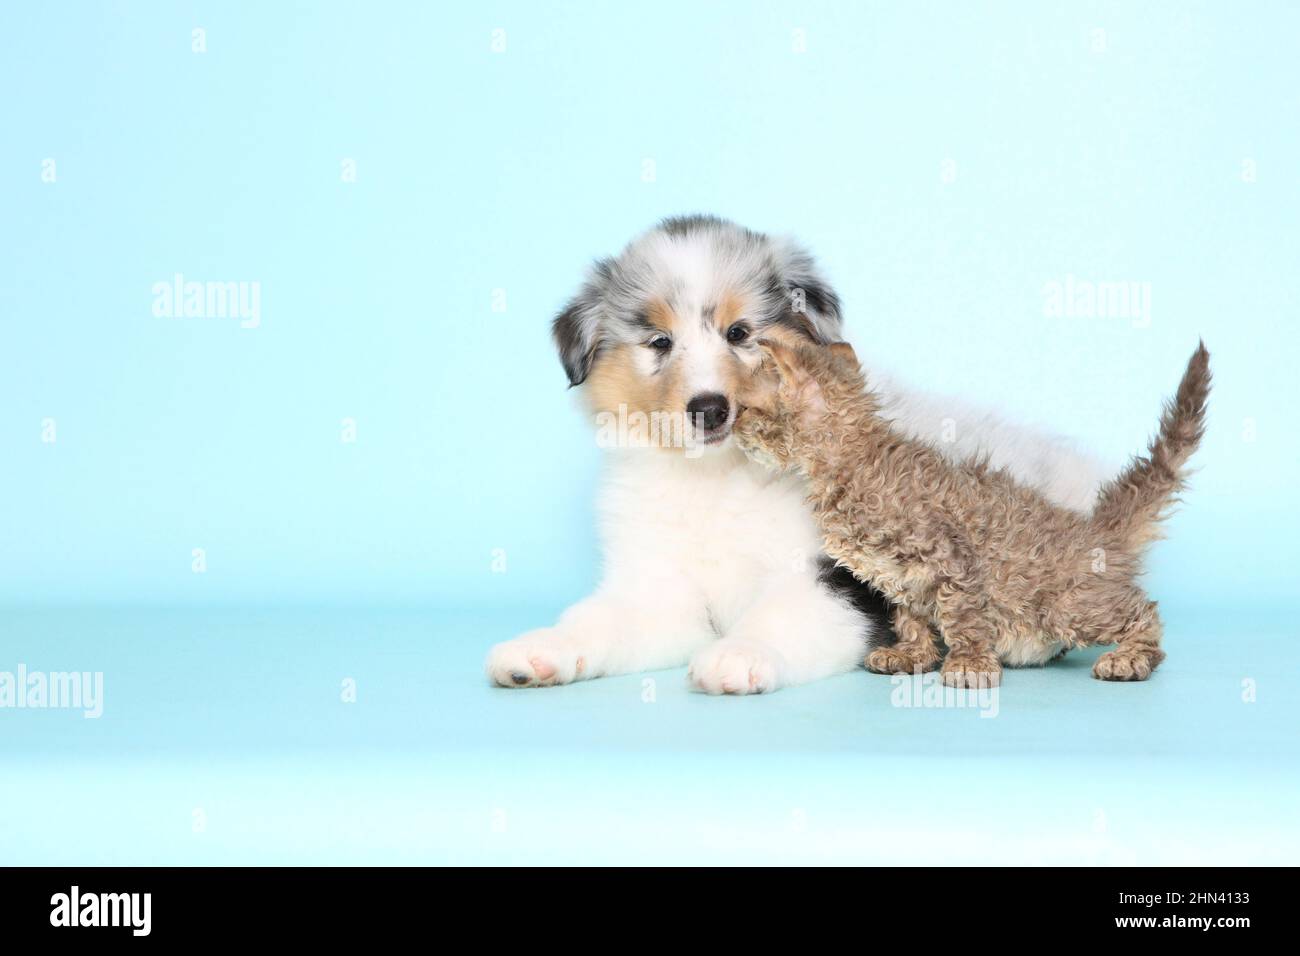 Selkirk Rex. Kitten and a American Collie puppy smoothing. Studio picture against a light-blue background. Germany Stock Photo